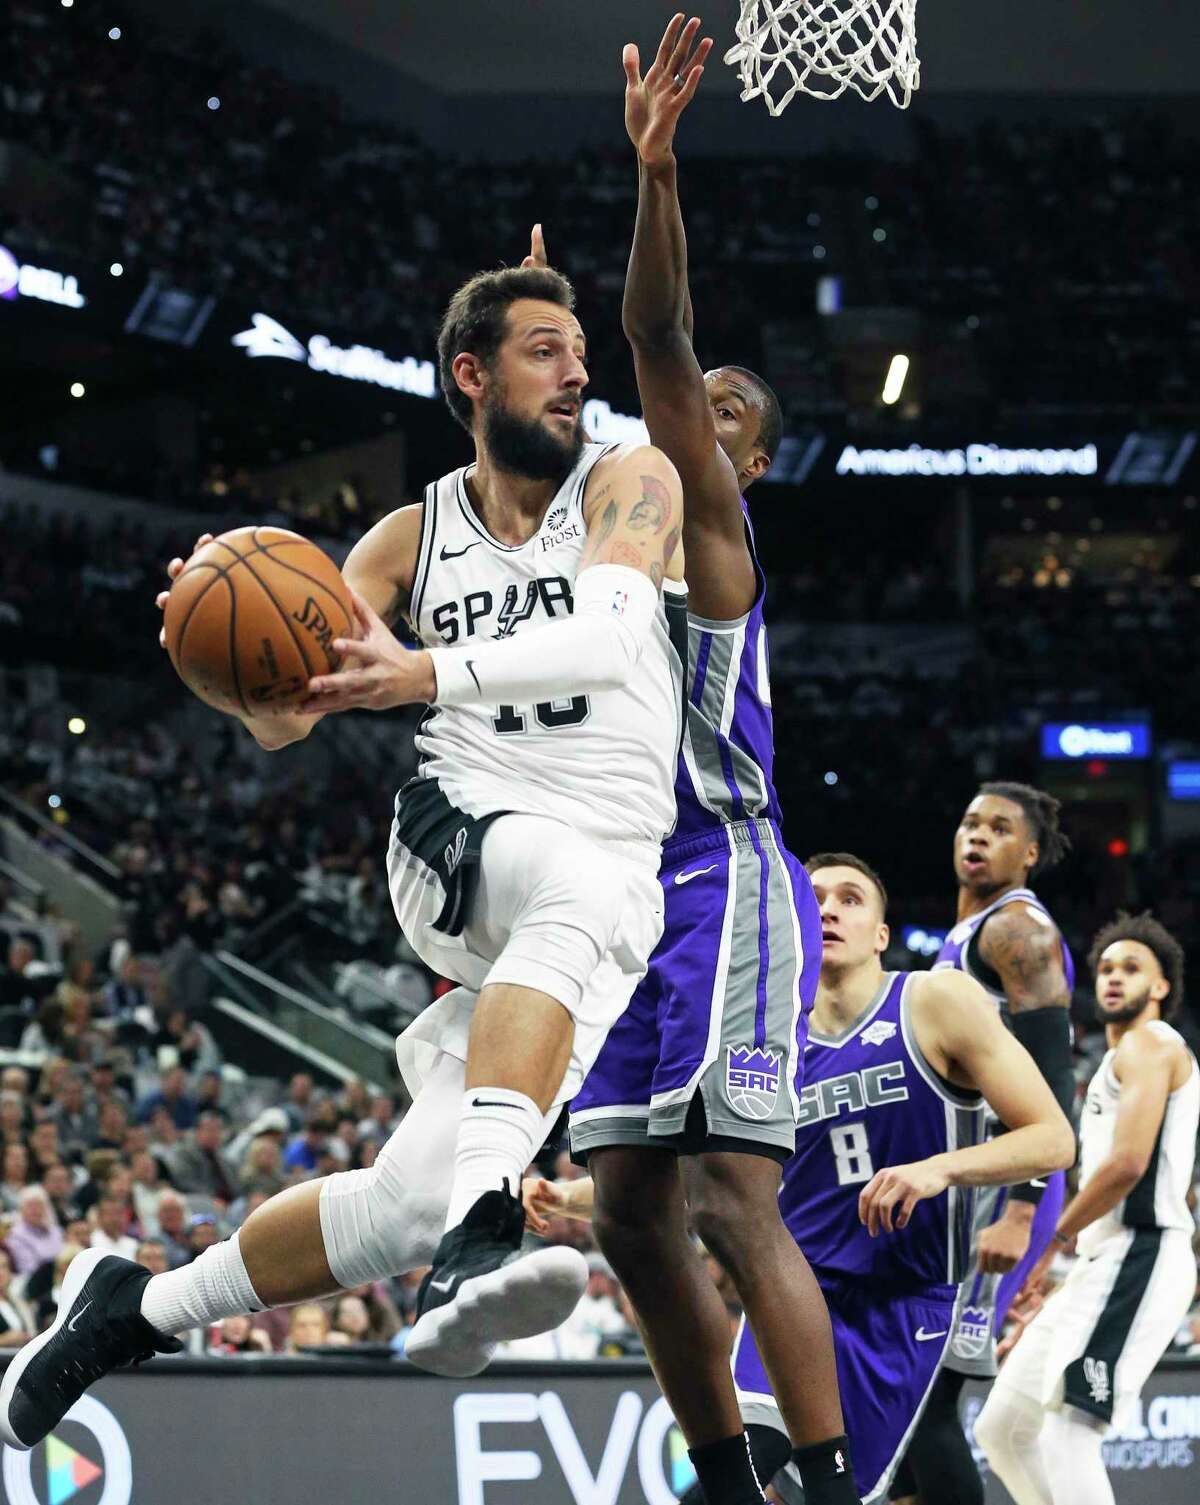 Spurs were interested in trading for guard Marco Belinelli per report